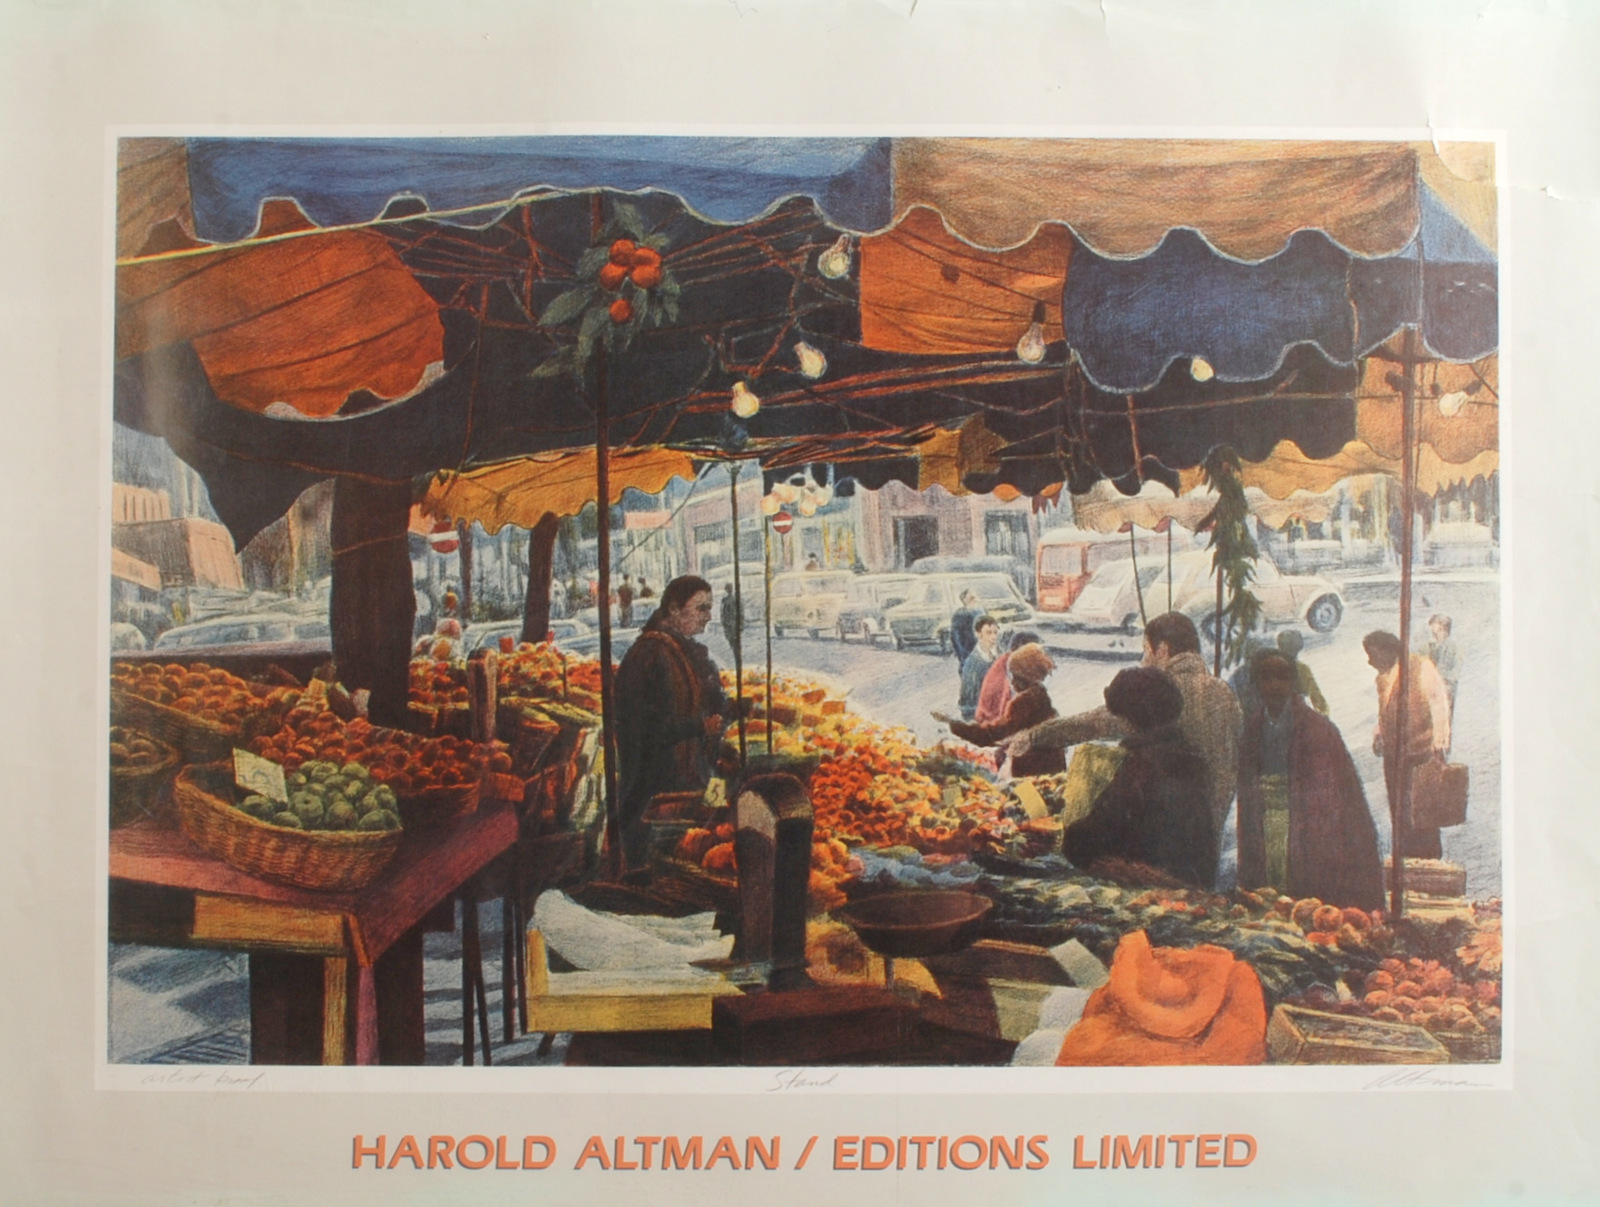 HAROLD ALTMAN Estampes Recentes (a pair) Lithograph 60 x 76cm Plus two other works by the same - Image 4 of 4